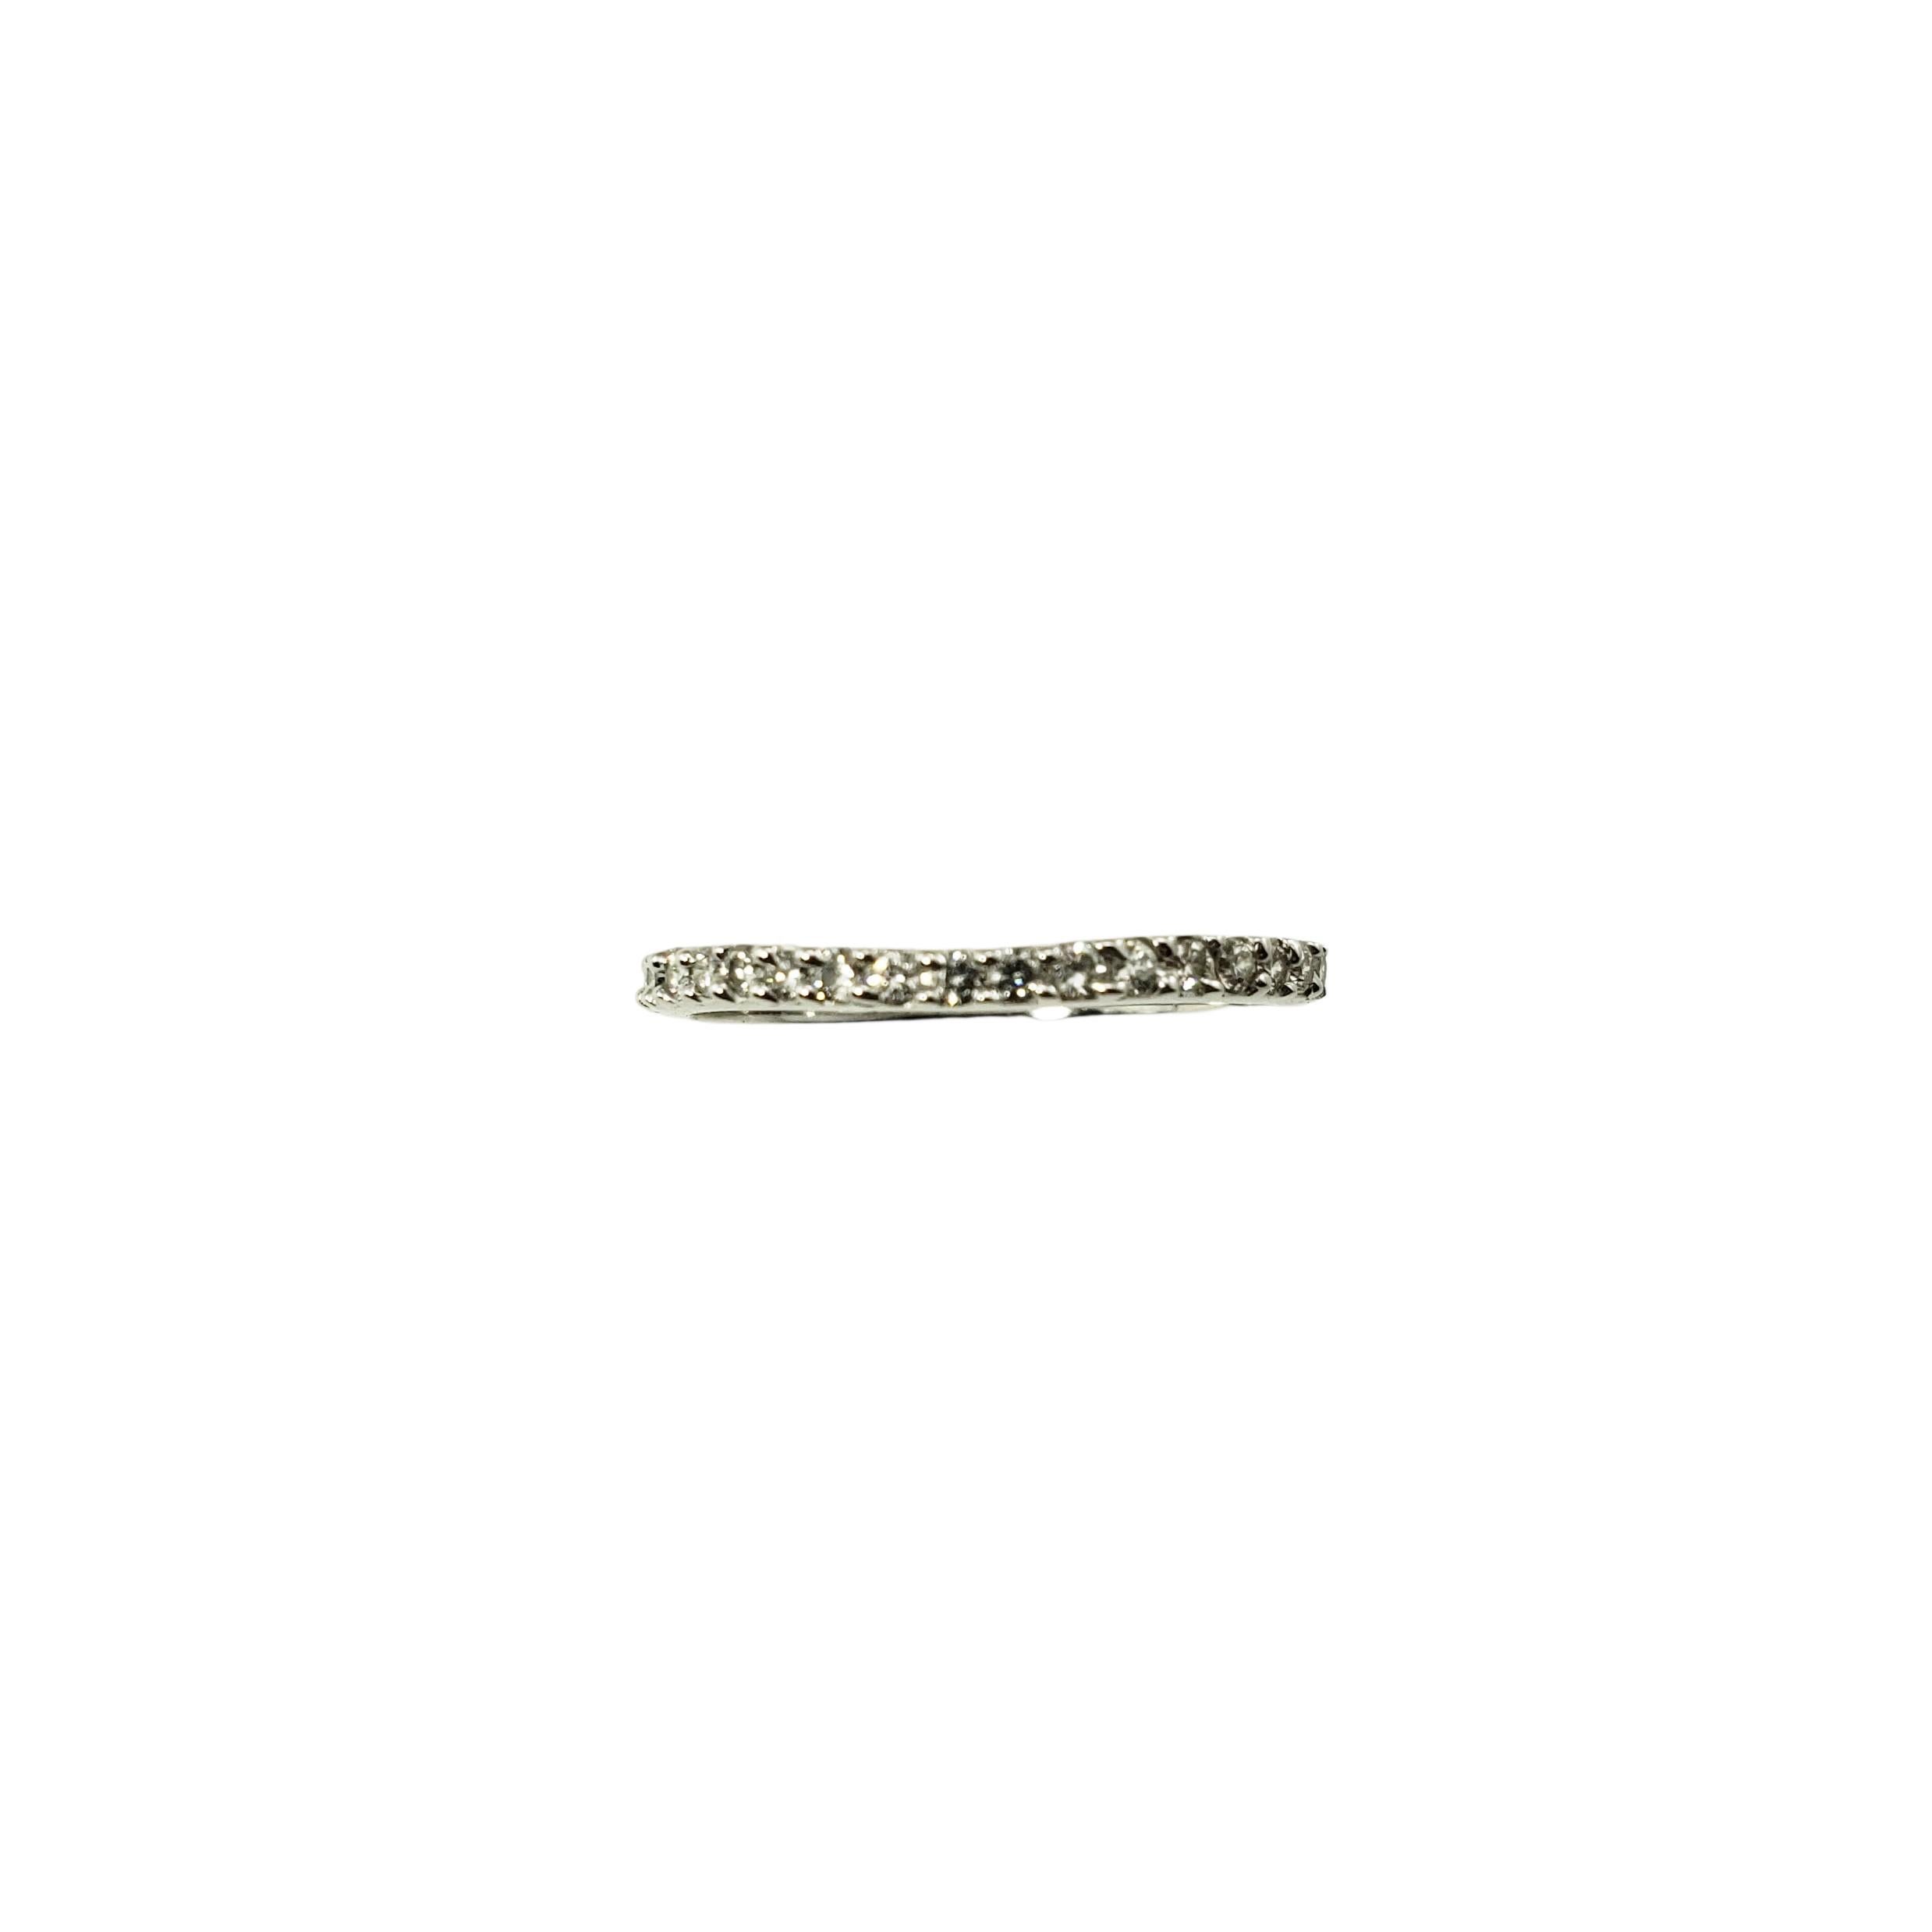 14 Karat White Gold and Diamond Band Ring Size 7-

This elegant 14K white gold band features 18 round brilliant cut diamonds set in a classic curved setting.  Width:  2 mm.  

Approximate total diamond weight:  .18 ct.

Diamond color: J-K

Diamond